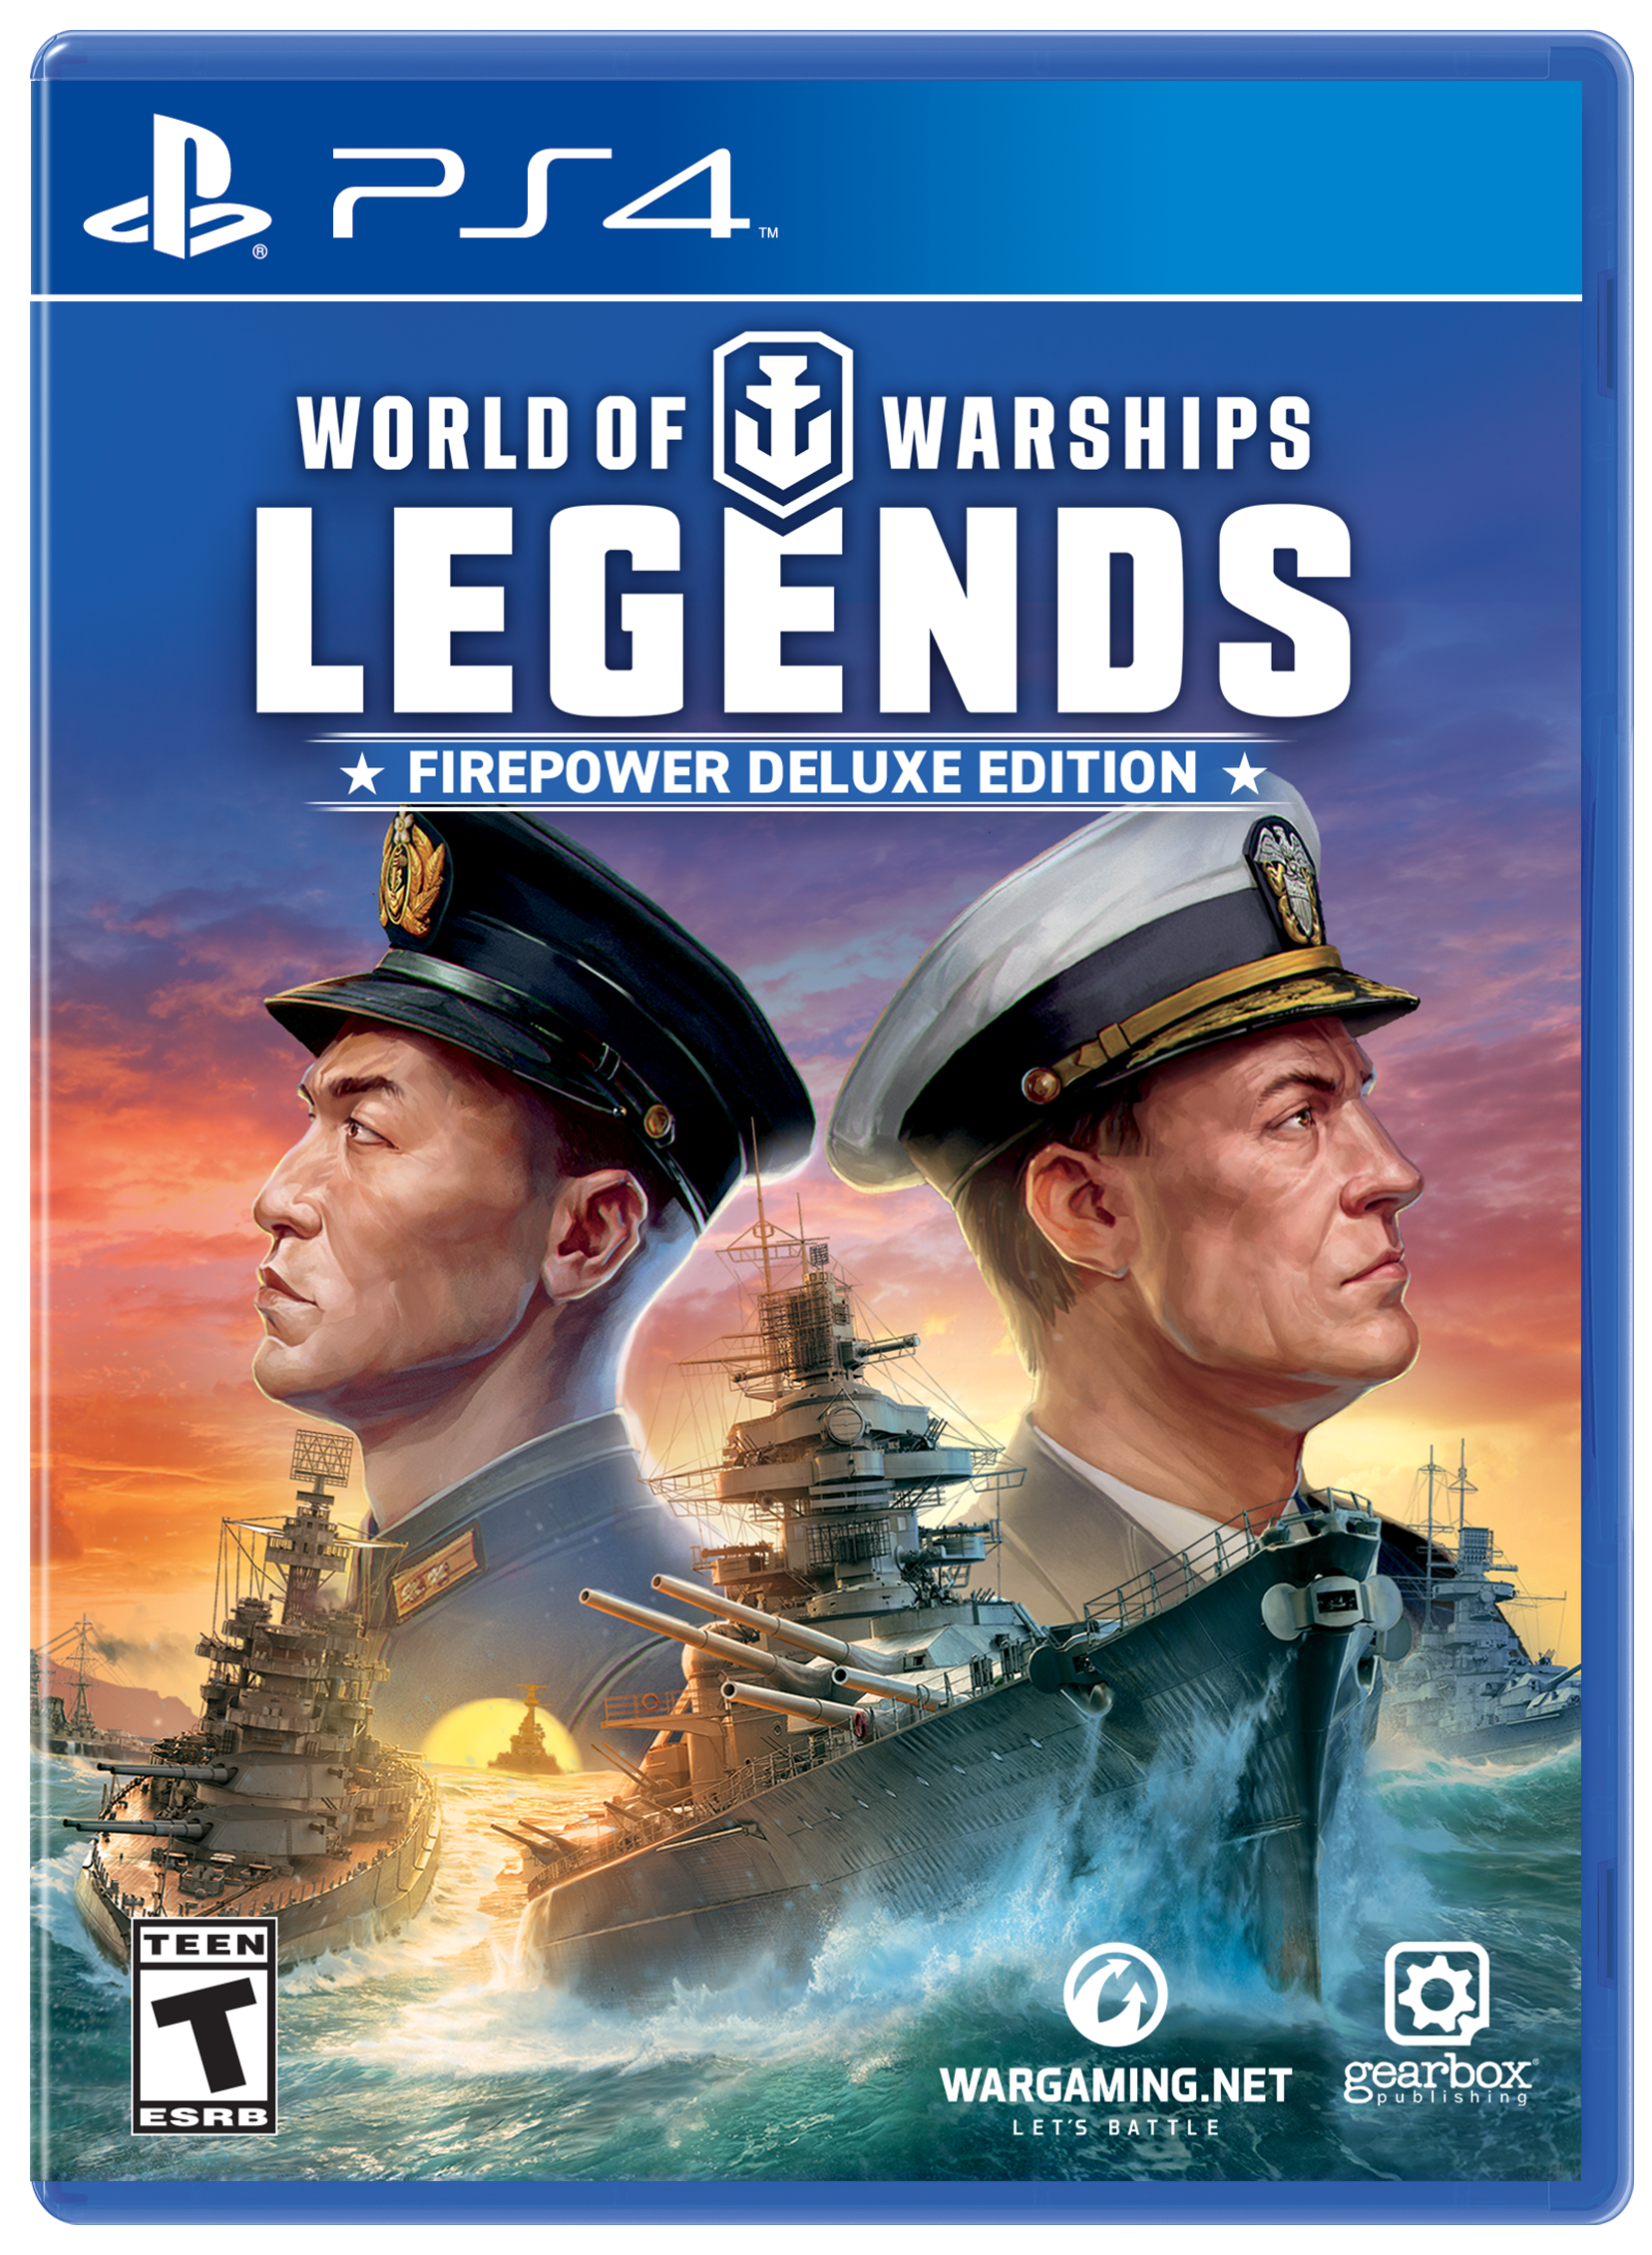 World of Warships: Legends Firepower Deluxe Edition